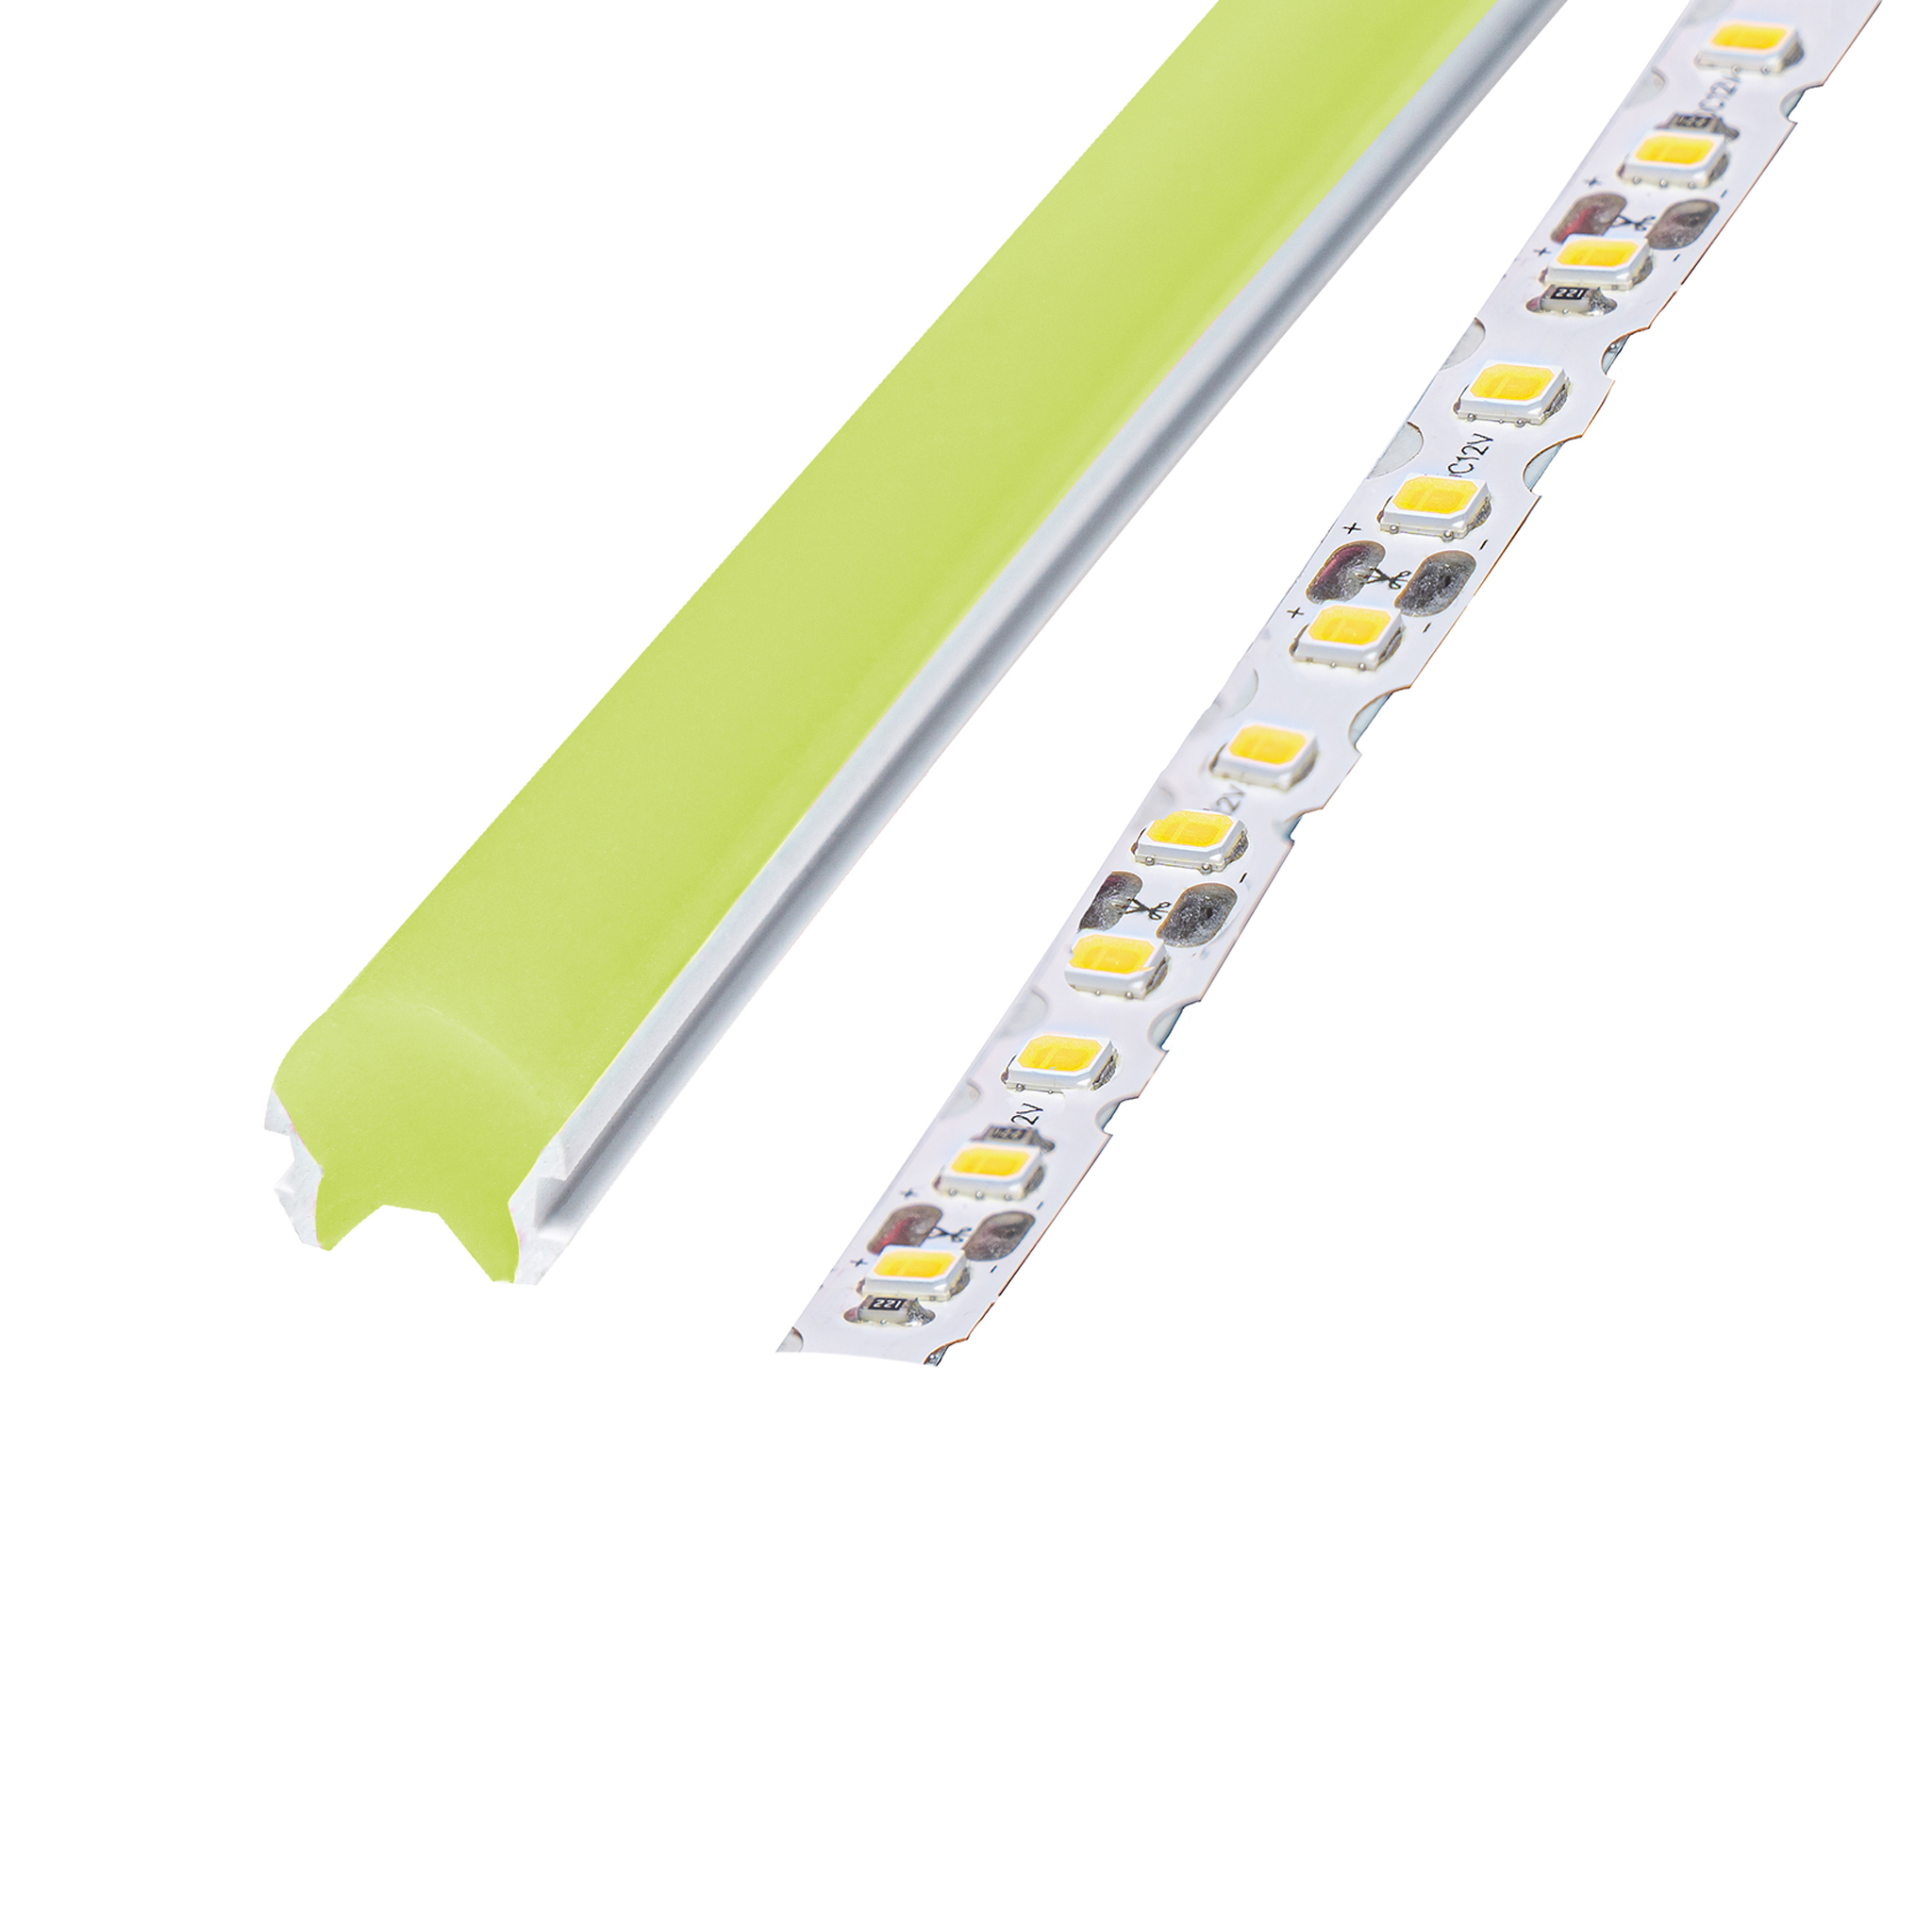 NEON LED flessibile LED flessibile in silicone due pezzi giallo limone,  DC12V, 8 mm